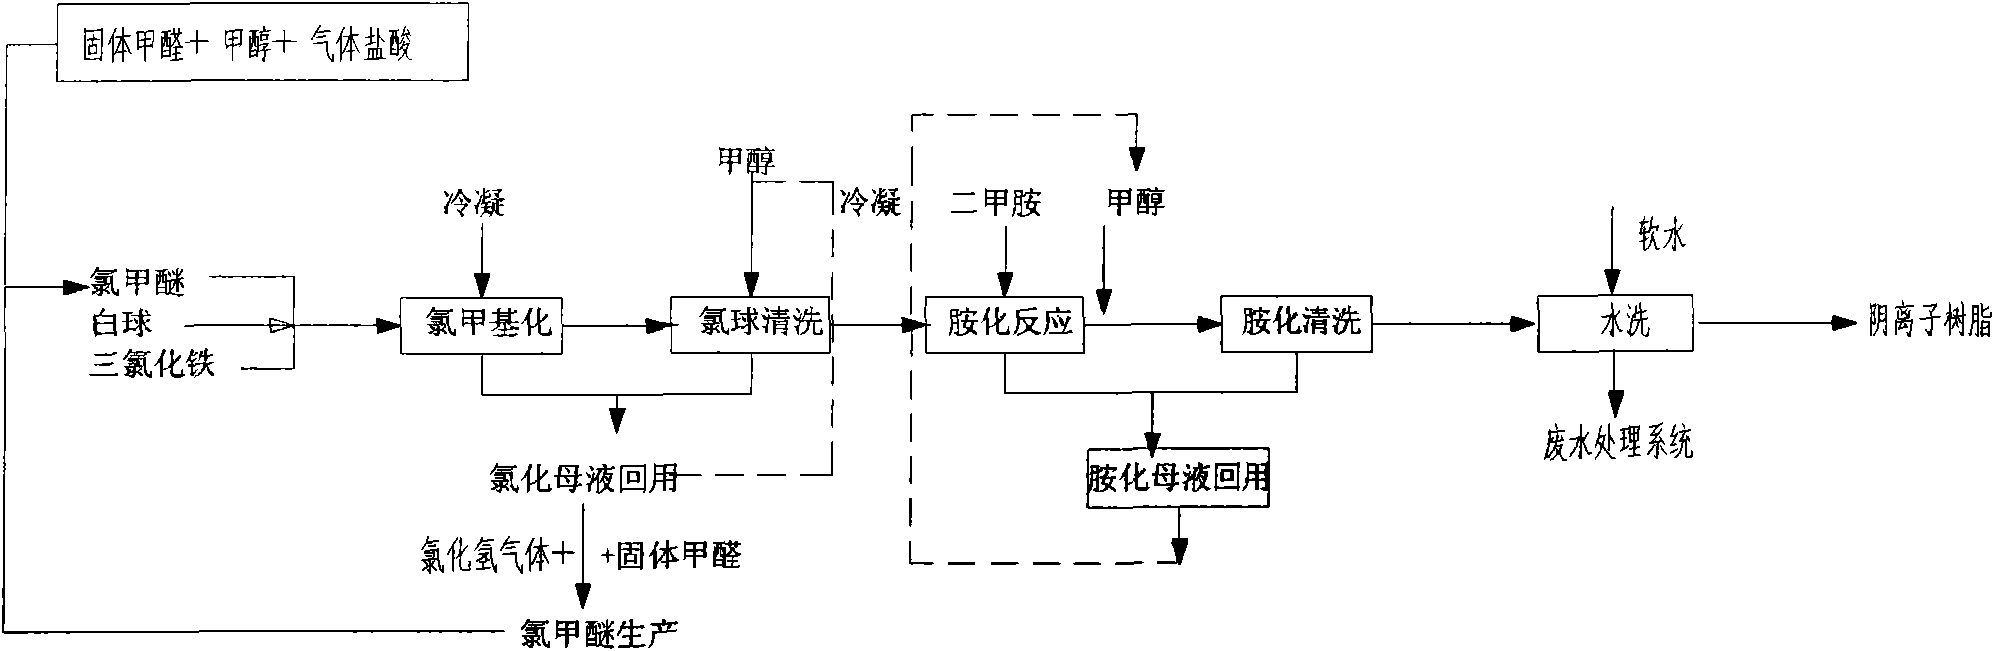 Anion exchange resin production system and production technology